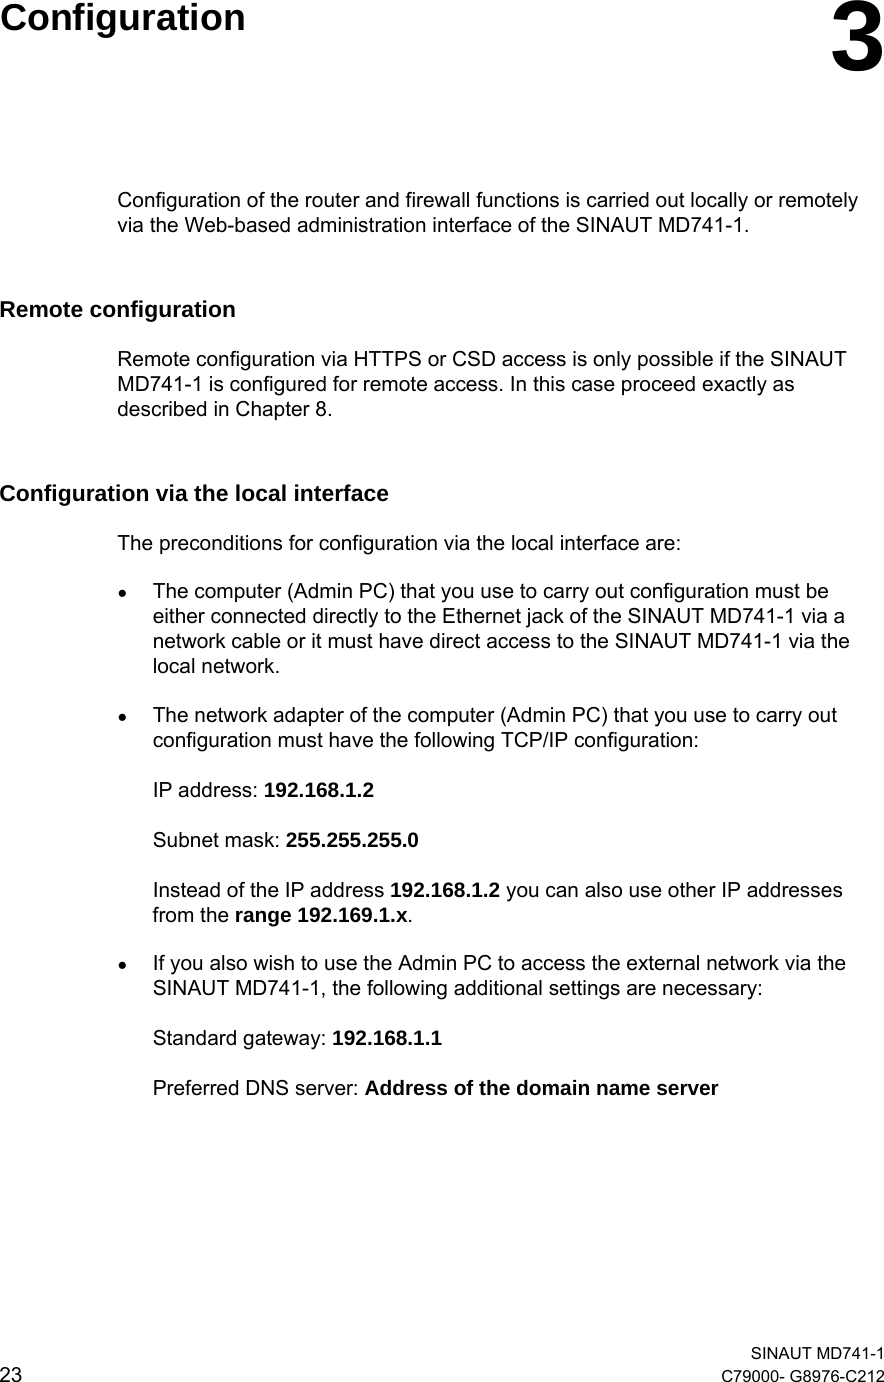   SINAUT MD741-1 23  C79000- G8976-C212    Configuration  3Configuration of the router and firewall functions is carried out locally or remotely via the Web-based administration interface of the SINAUT MD741-1. Remote configuration Remote configuration via HTTPS or CSD access is only possible if the SINAUT MD741-1 is configured for remote access. In this case proceed exactly as described in Chapter 8. Configuration via the local interface The preconditions for configuration via the local interface are: ● The computer (Admin PC) that you use to carry out configuration must be either connected directly to the Ethernet jack of the SINAUT MD741-1 via a network cable or it must have direct access to the SINAUT MD741-1 via the local network. ● The network adapter of the computer (Admin PC) that you use to carry out configuration must have the following TCP/IP configuration:  IP address: 192.168.1.2  Subnet mask: 255.255.255.0  Instead of the IP address 192.168.1.2 you can also use other IP addresses from the range 192.169.1.x. ● If you also wish to use the Admin PC to access the external network via the SINAUT MD741-1, the following additional settings are necessary:   Standard gateway: 192.168.1.1  Preferred DNS server: Address of the domain name server  